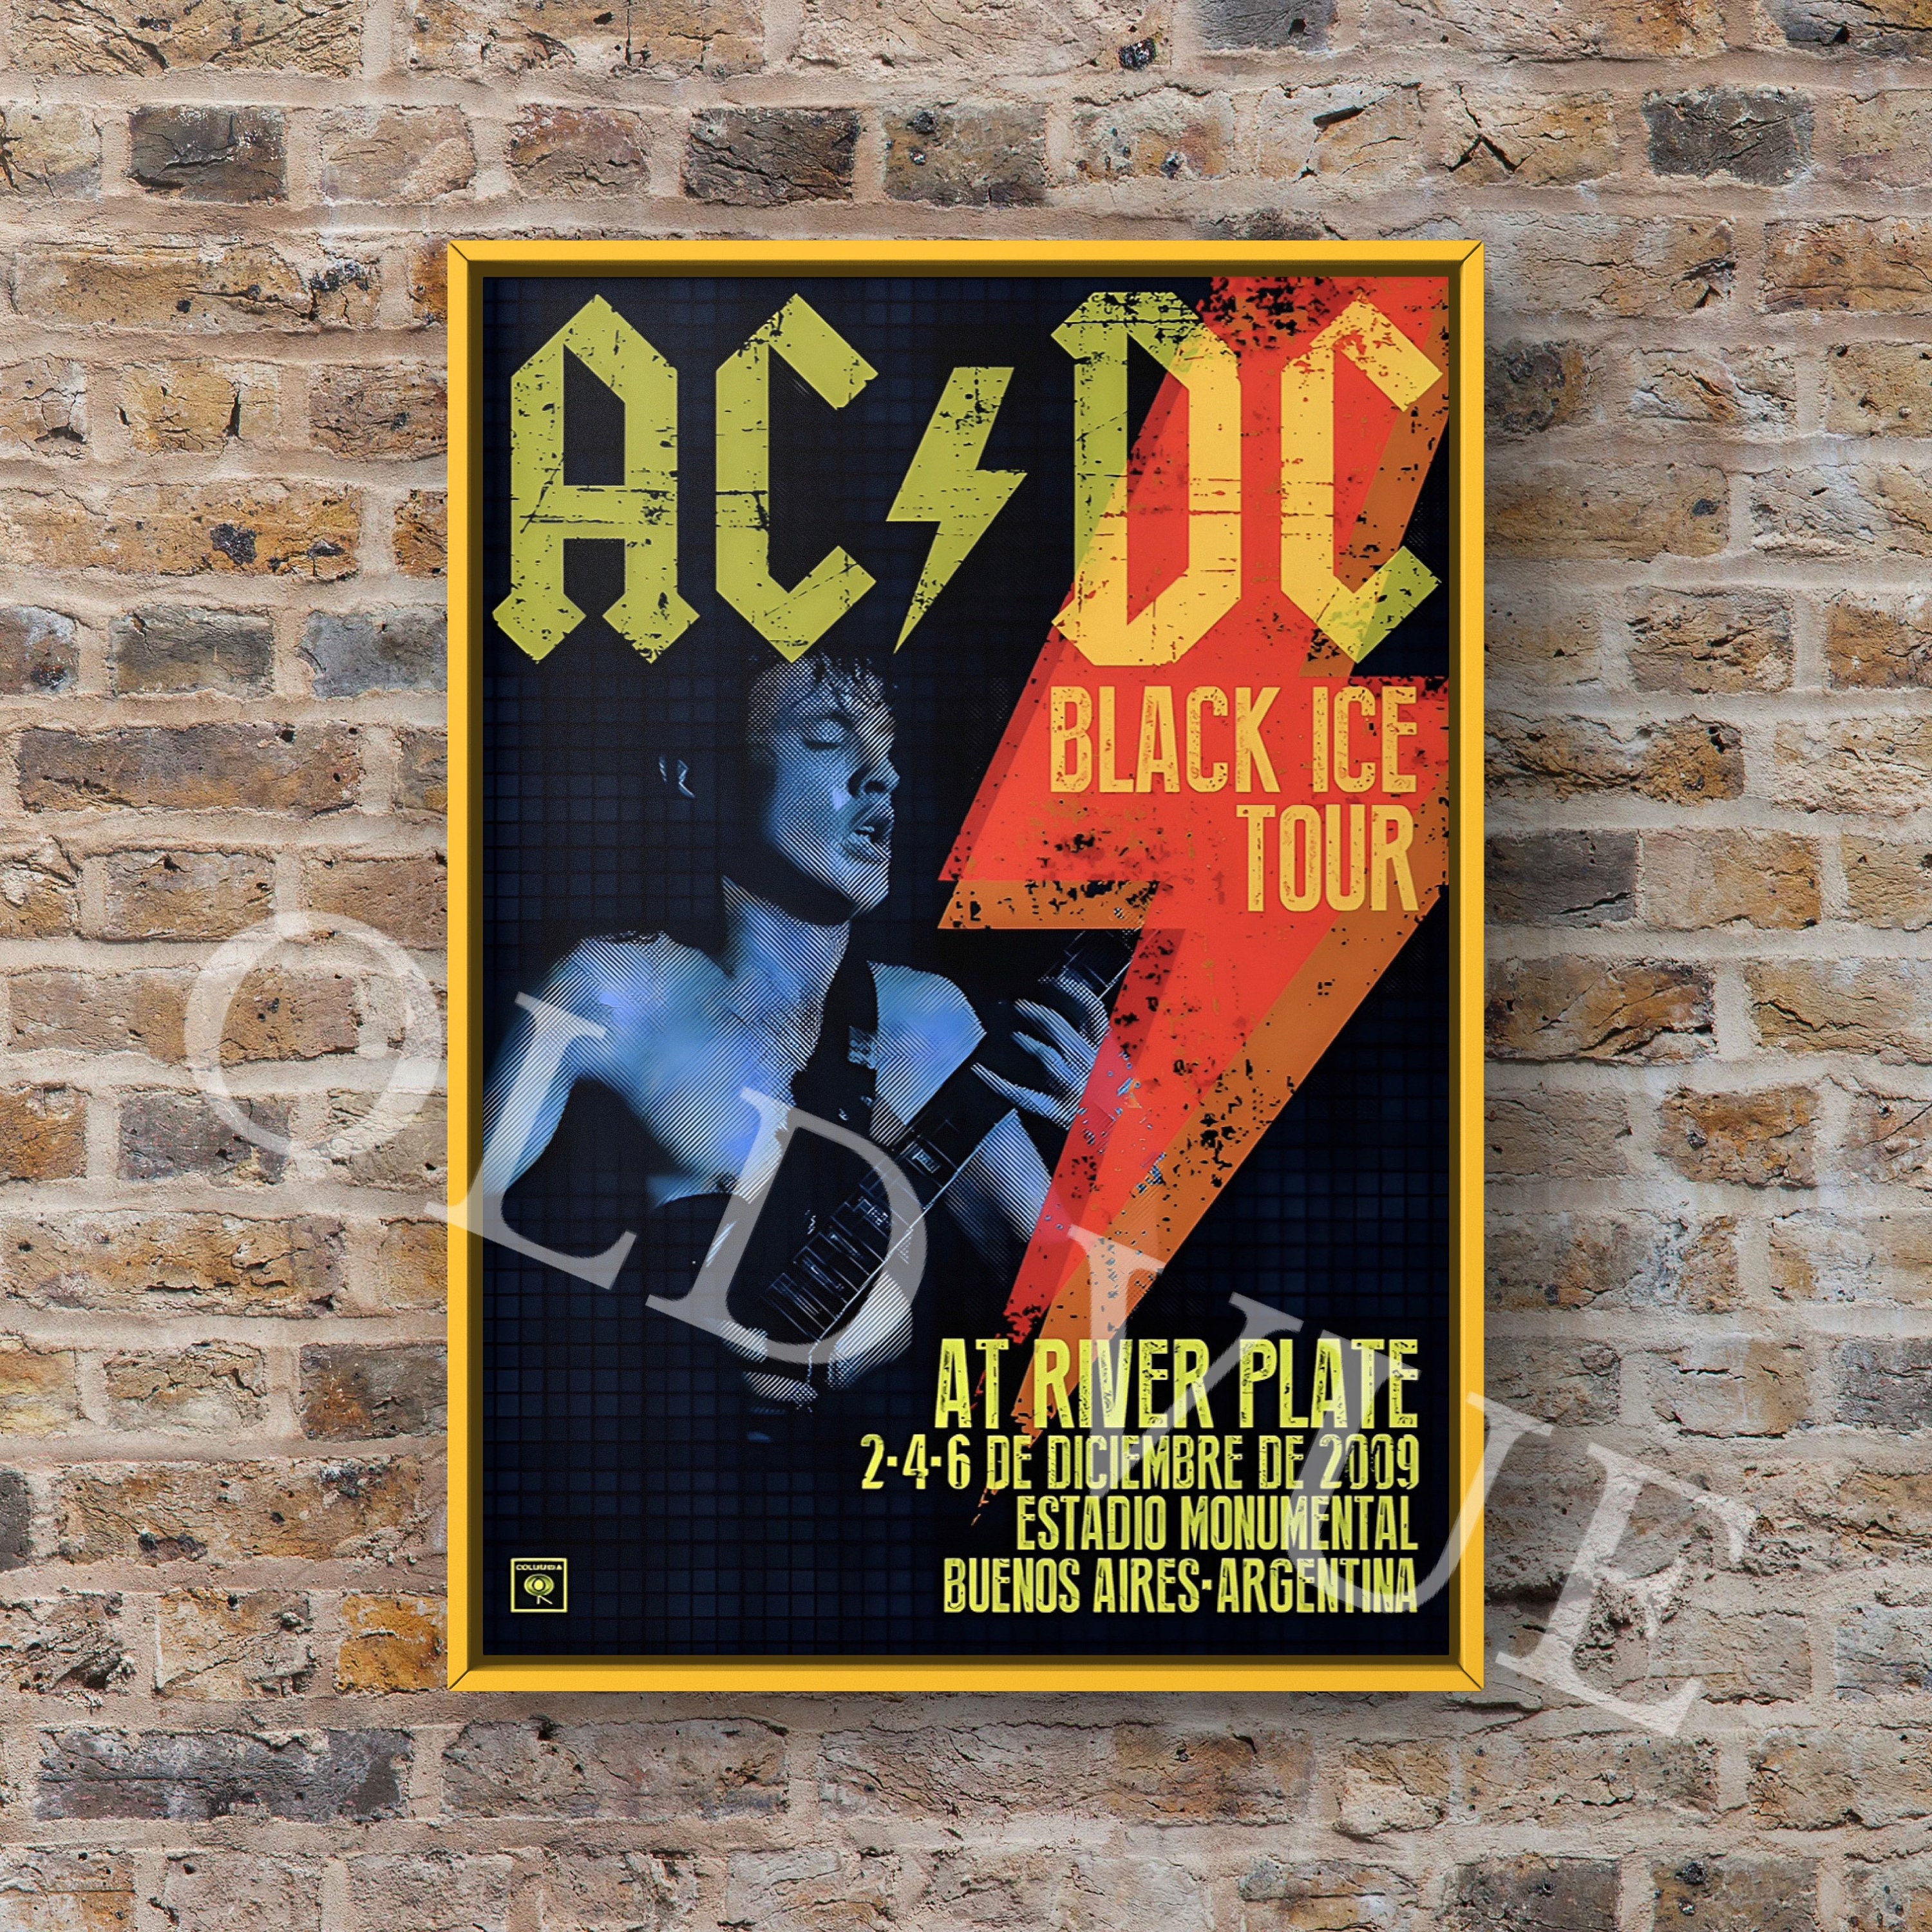 AC/DC Black Ice or 12 Print. X Art Inches Graphic Print Rare Inches Tour - 8 Poster. X 6 / 8 Music/concert Etsy Poster